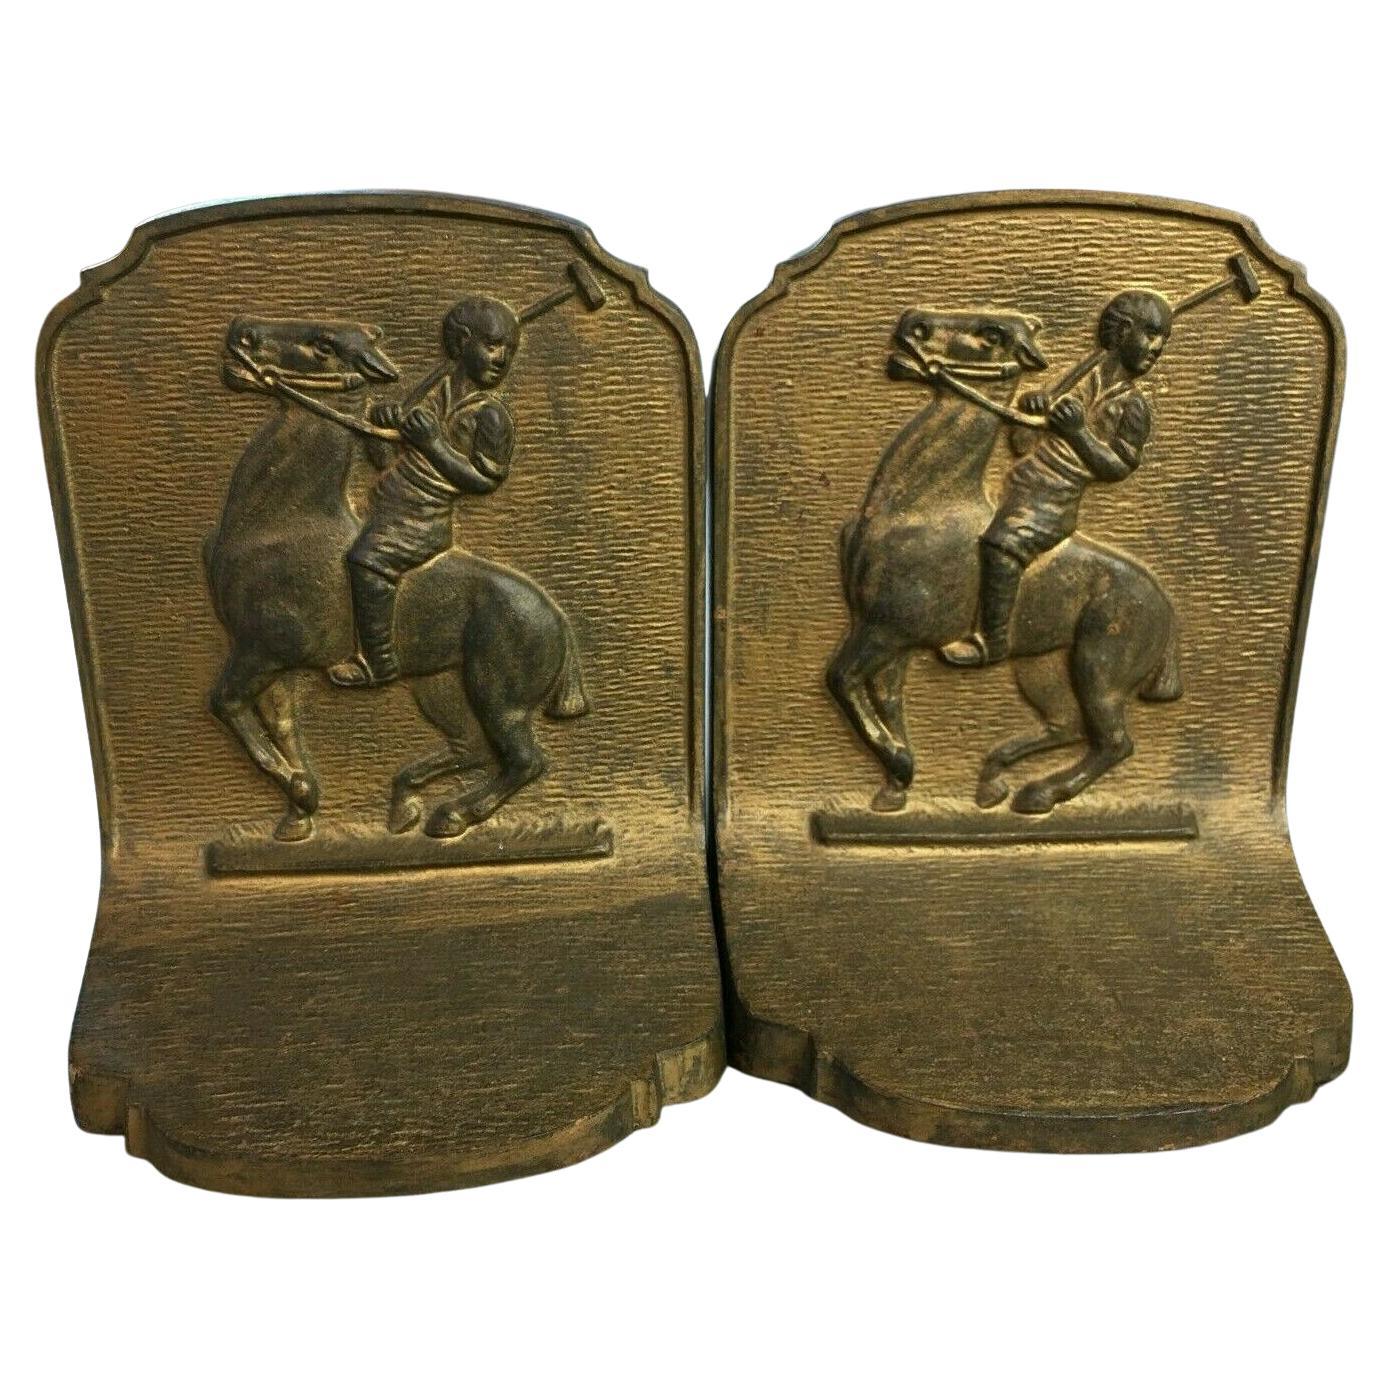 Iron Fine/Detailed Gilded Antique B&H Cast Polo Players on Horseback Antique Bookends For Sale